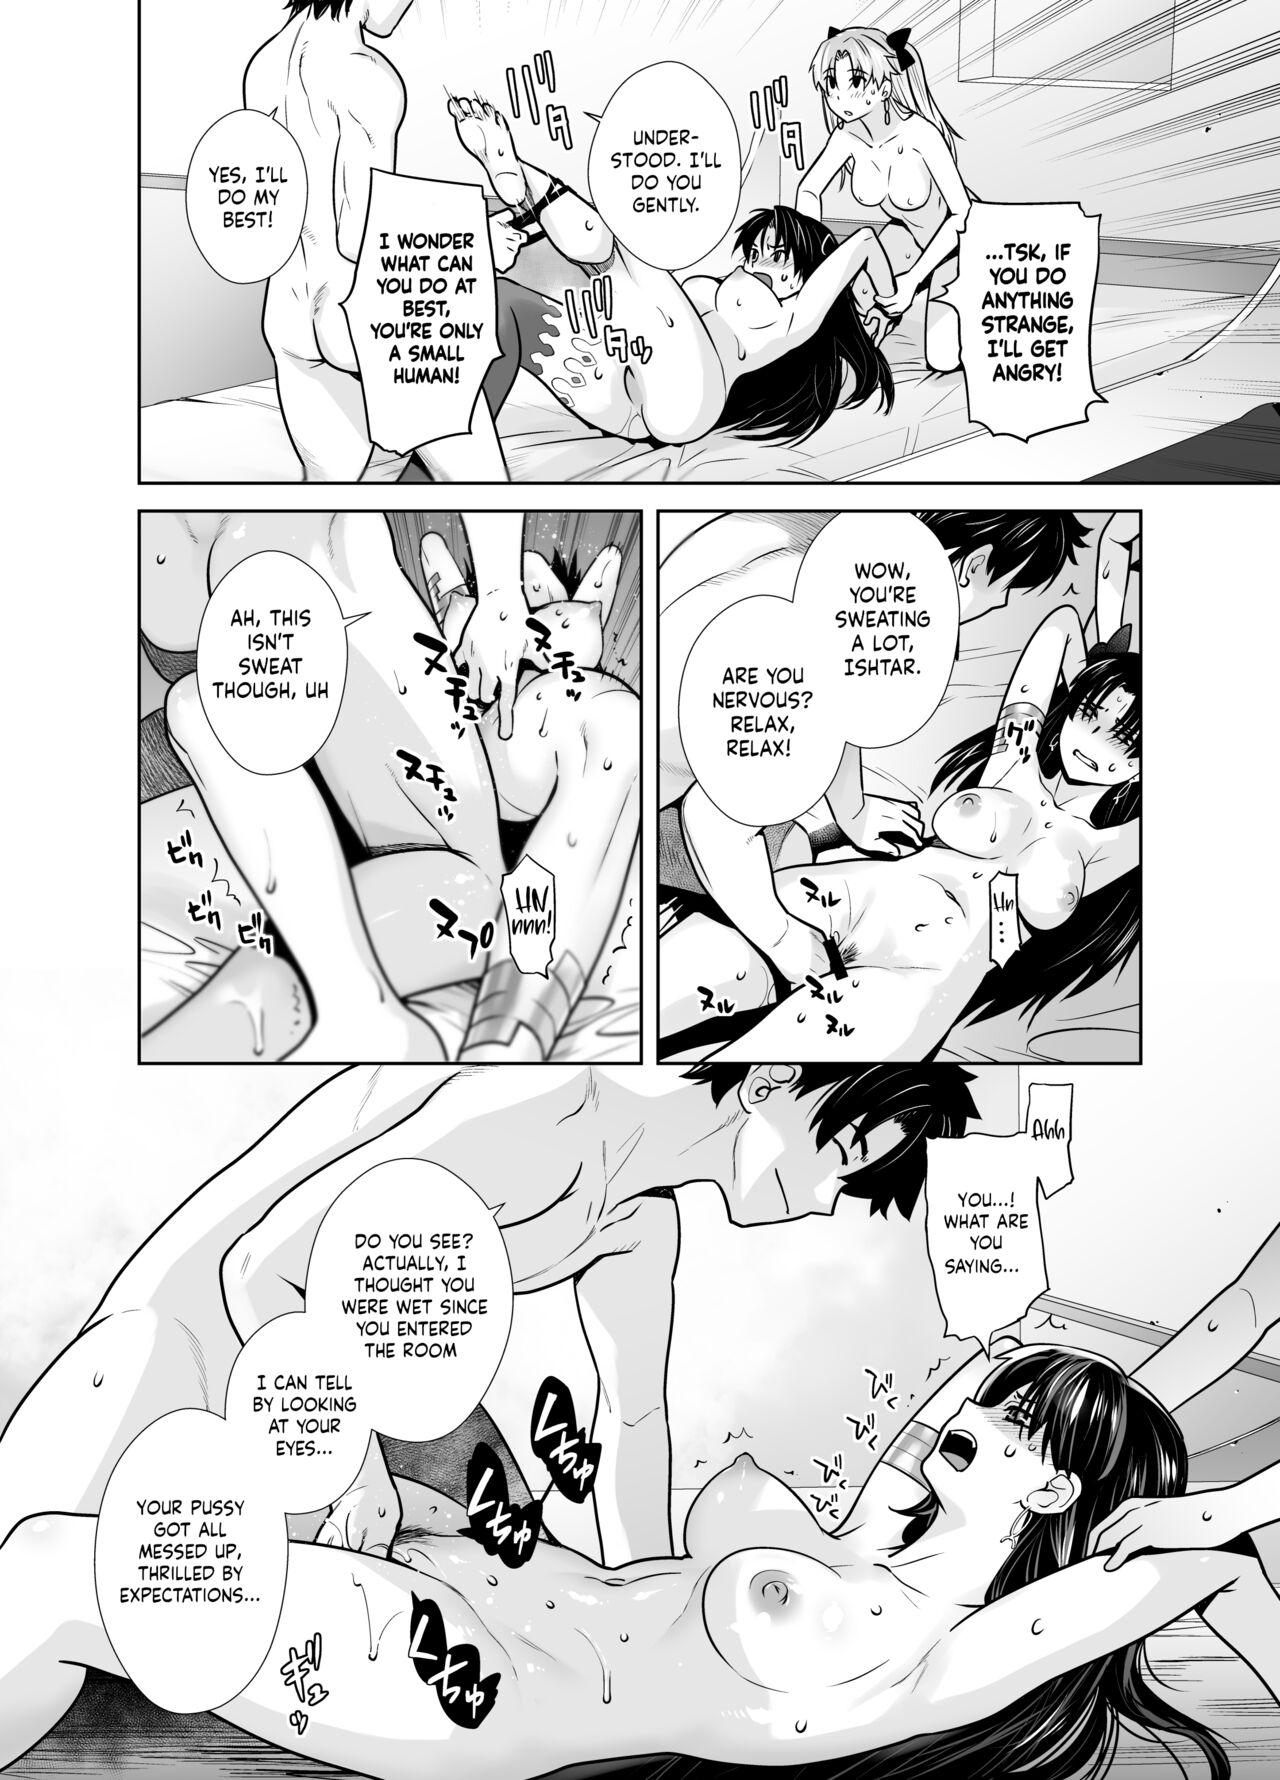 Chicks HEAVEN'S DRIVE 10 - Fate grand order Whores - Page 12